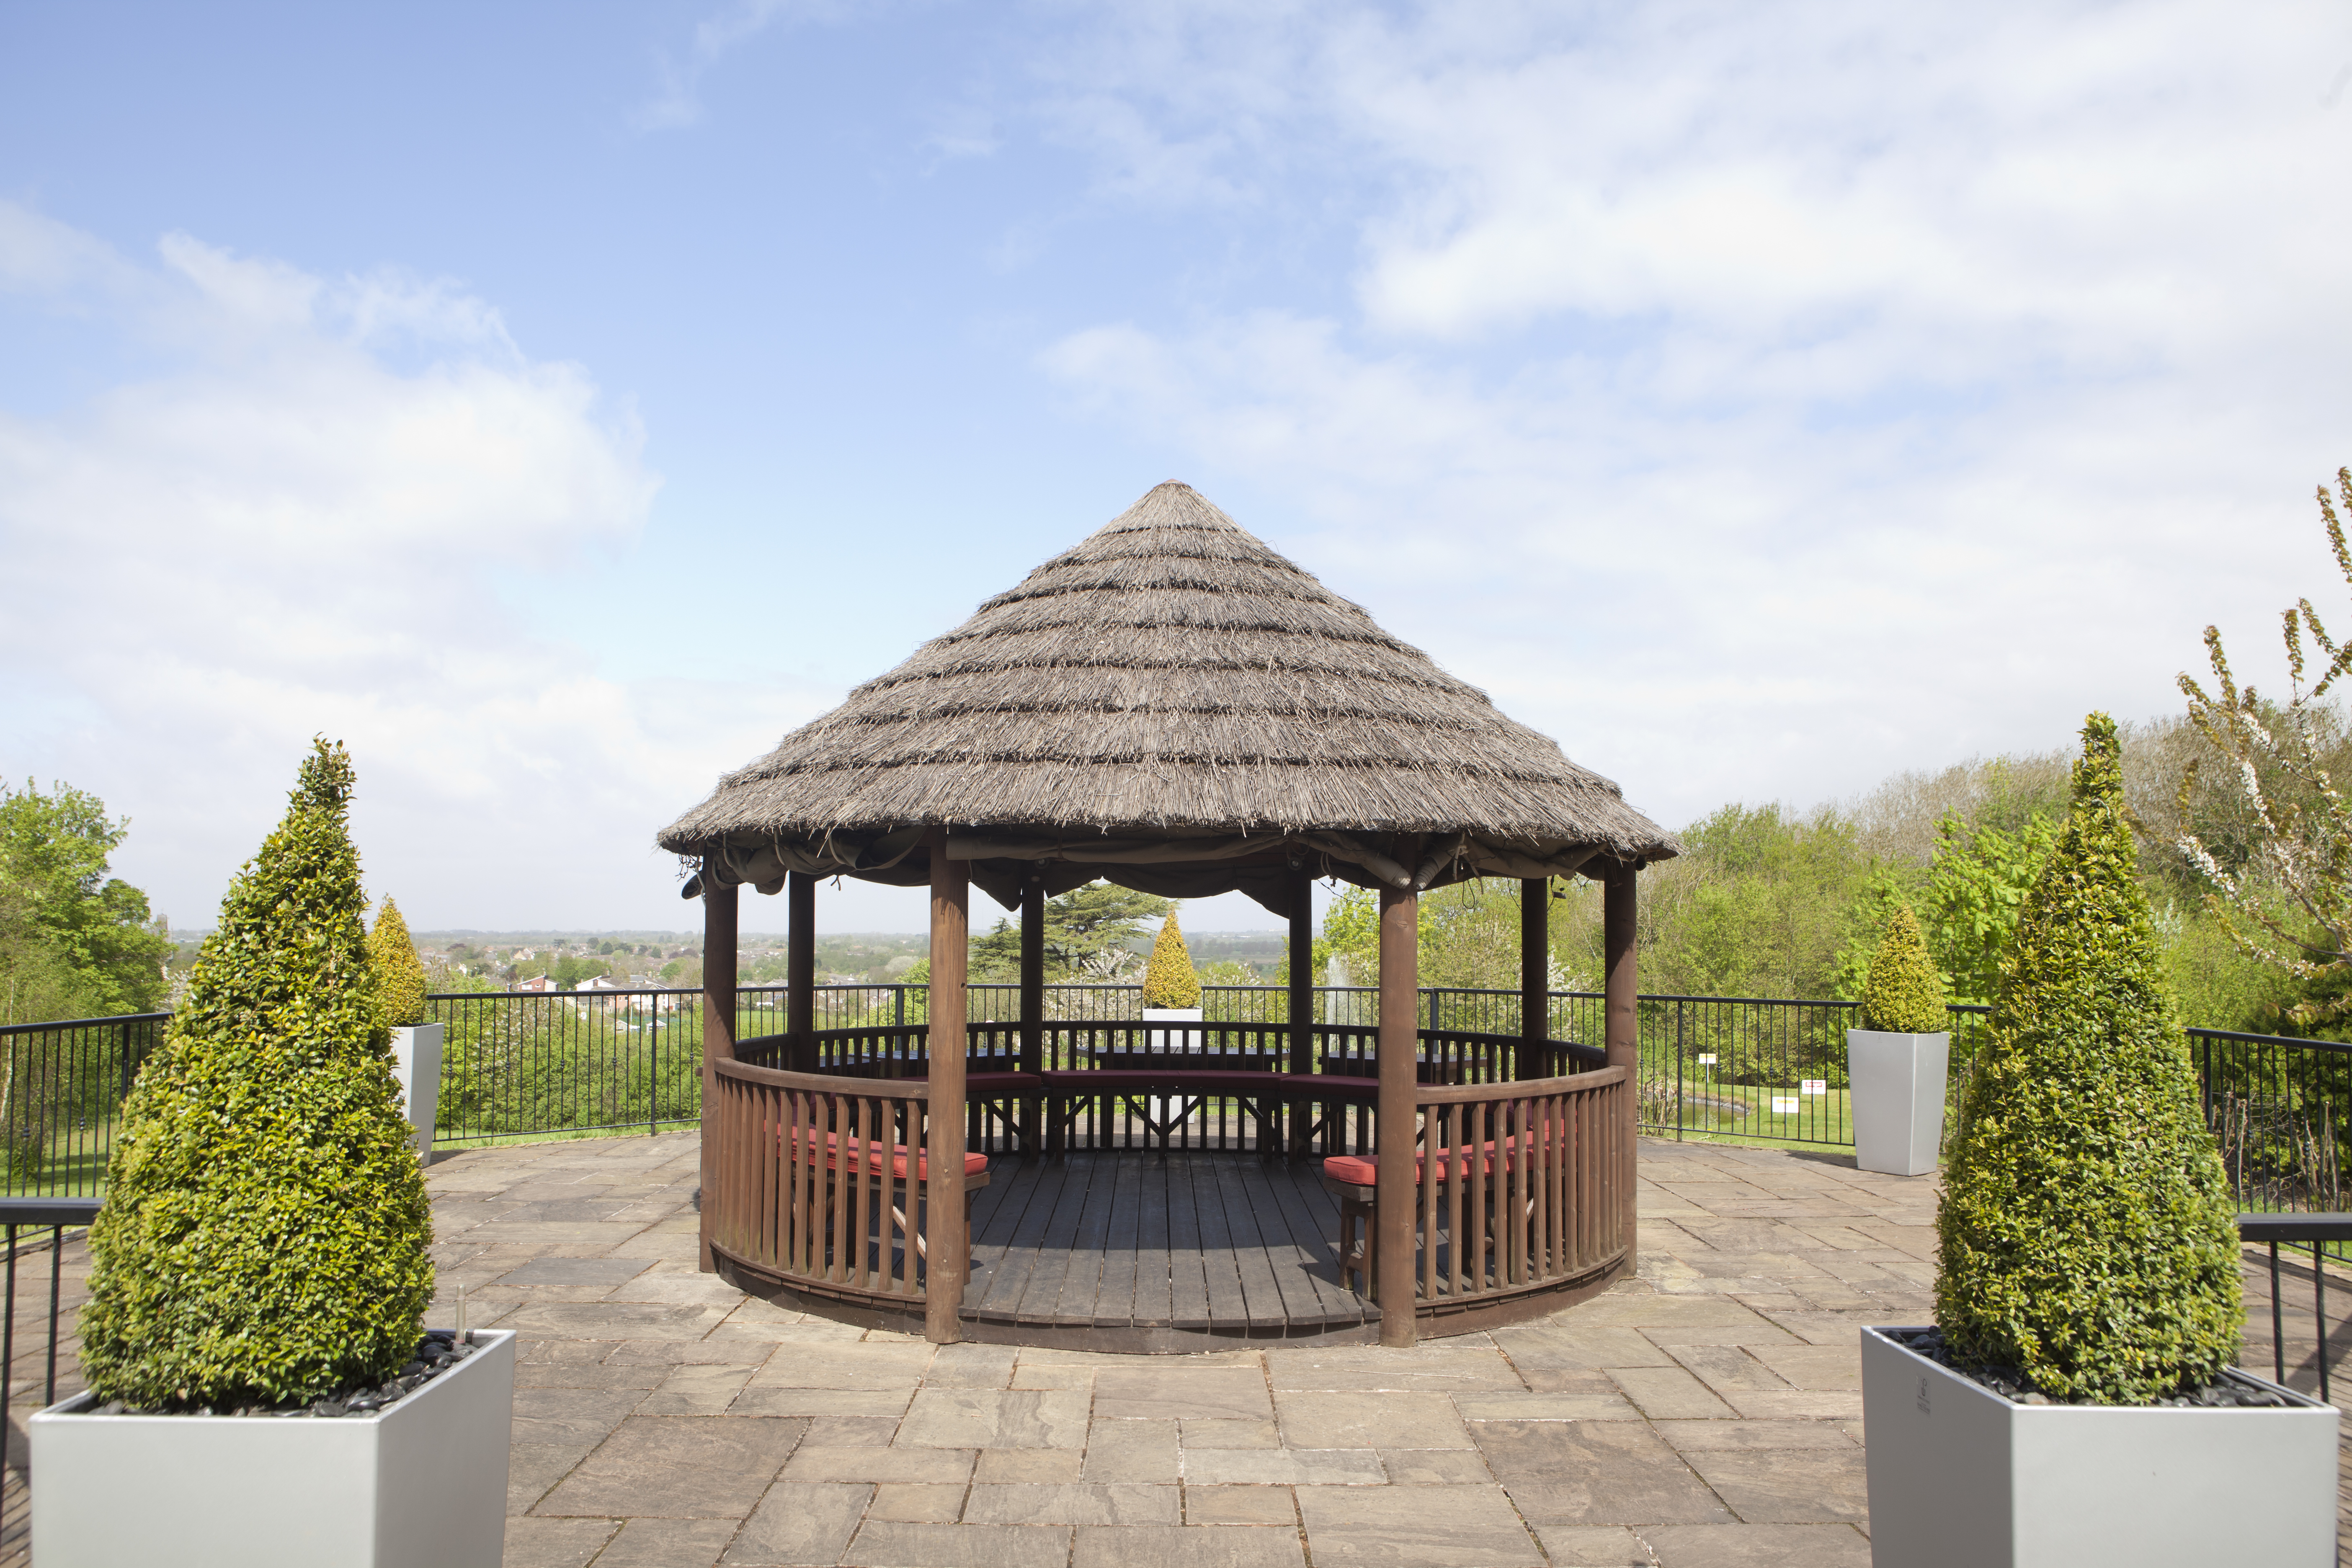 Detailed View of Seating Under Gazebo in Hotel Garden on a Sunny  Day